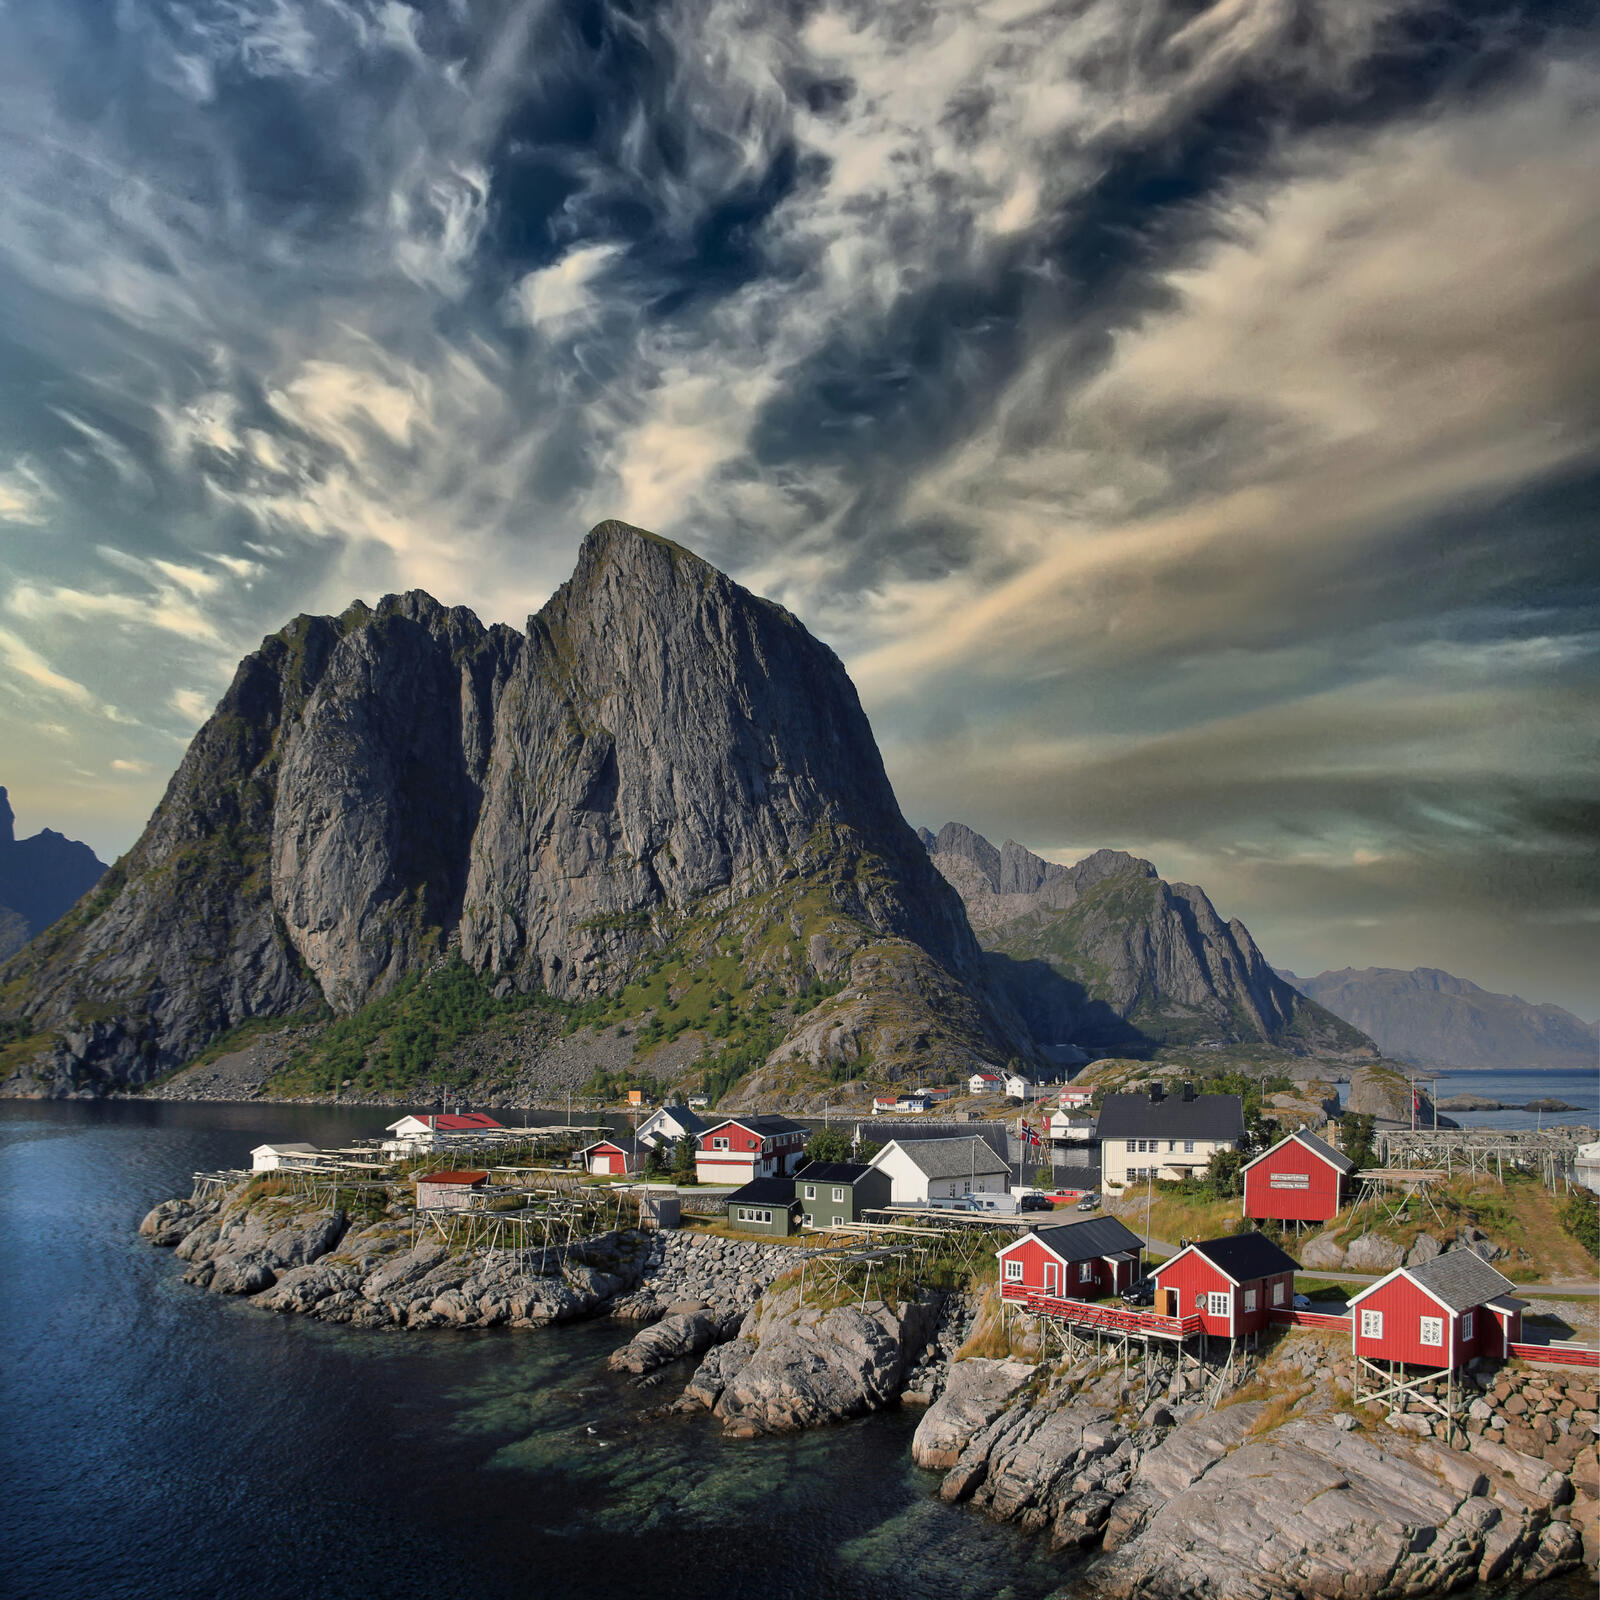 Wallpapers houses mountains Norway on the desktop